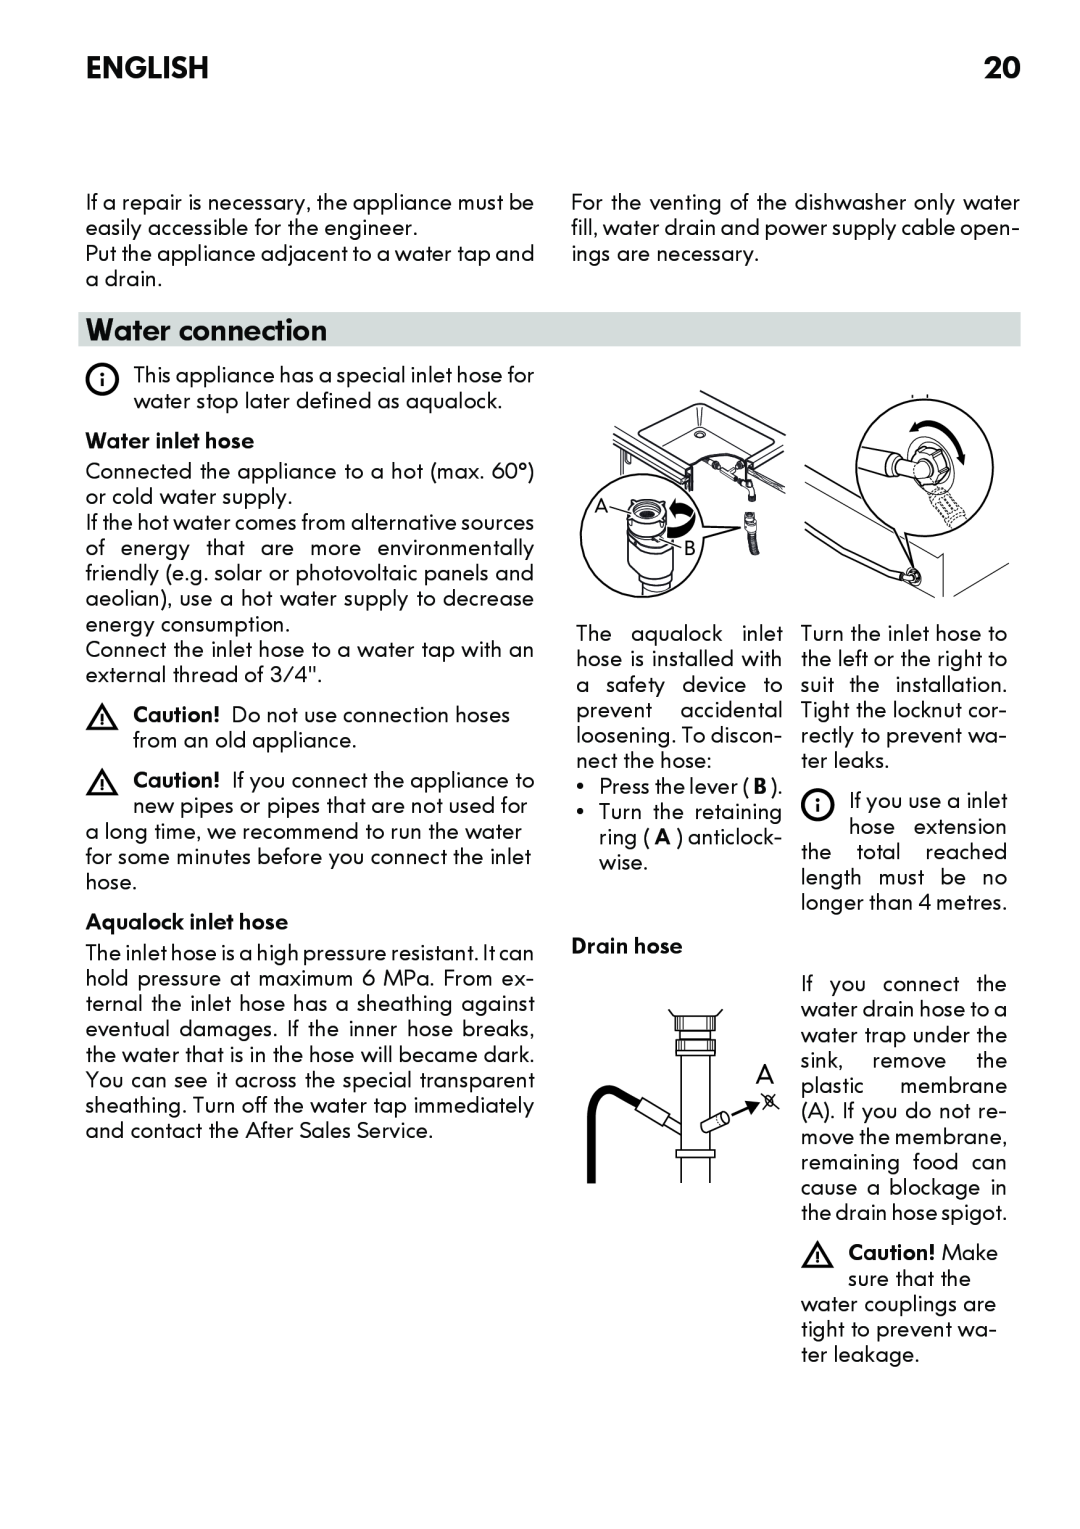 IKEA DW60 manual Water connection, English, Put the appliance adjacent to a water tap and a drain 